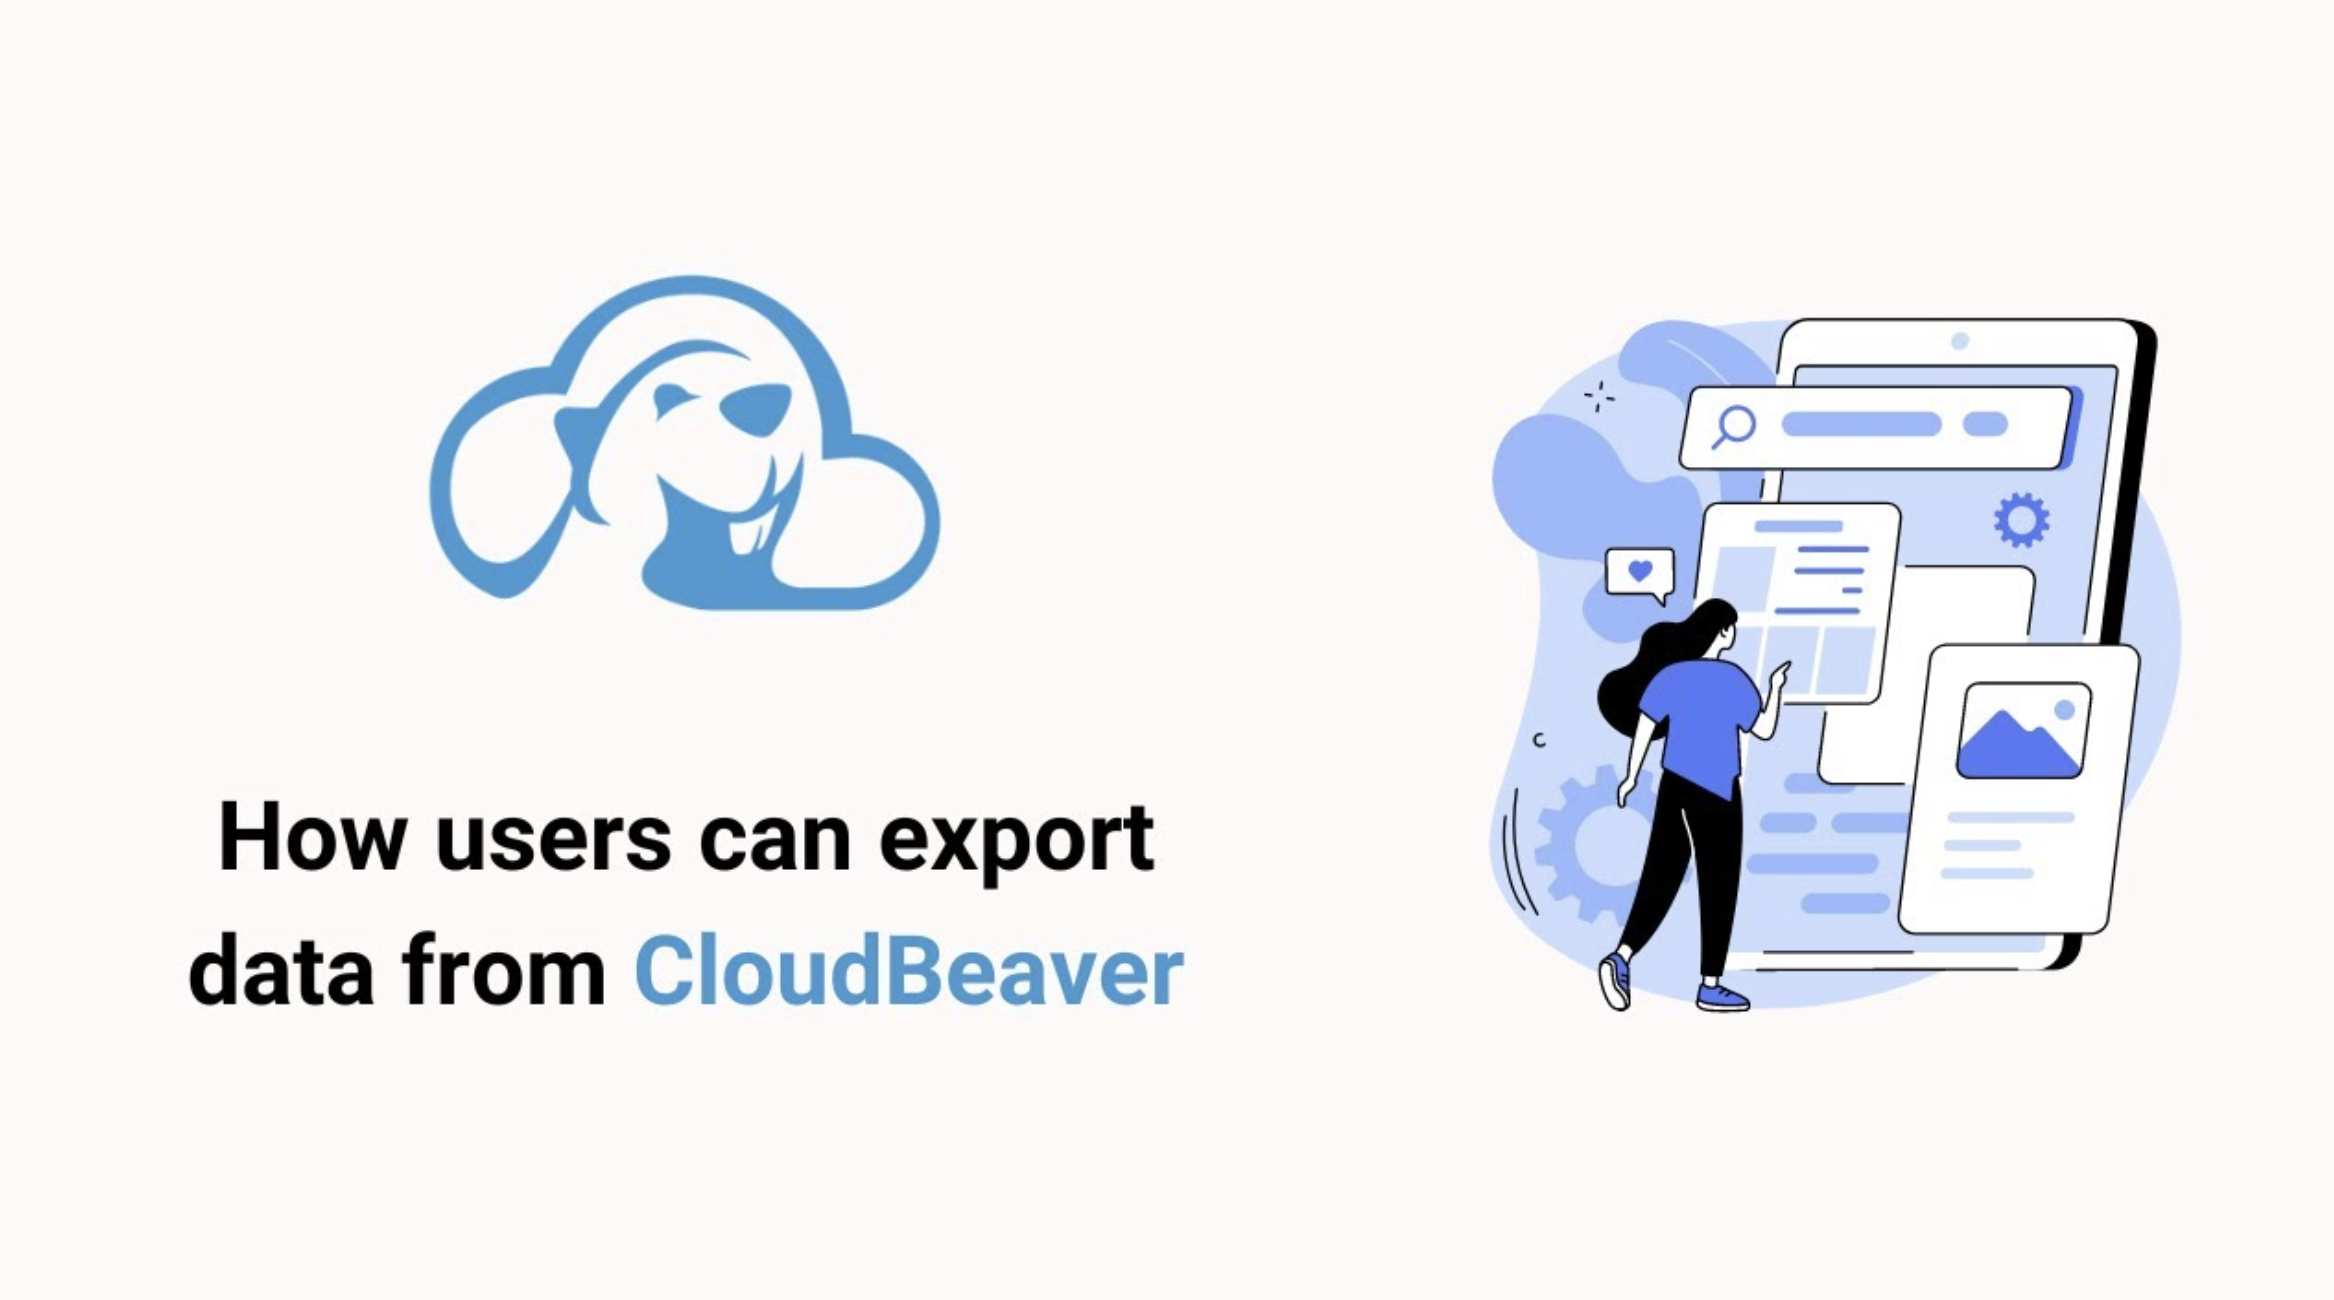 How users can export data from CloudBeaver